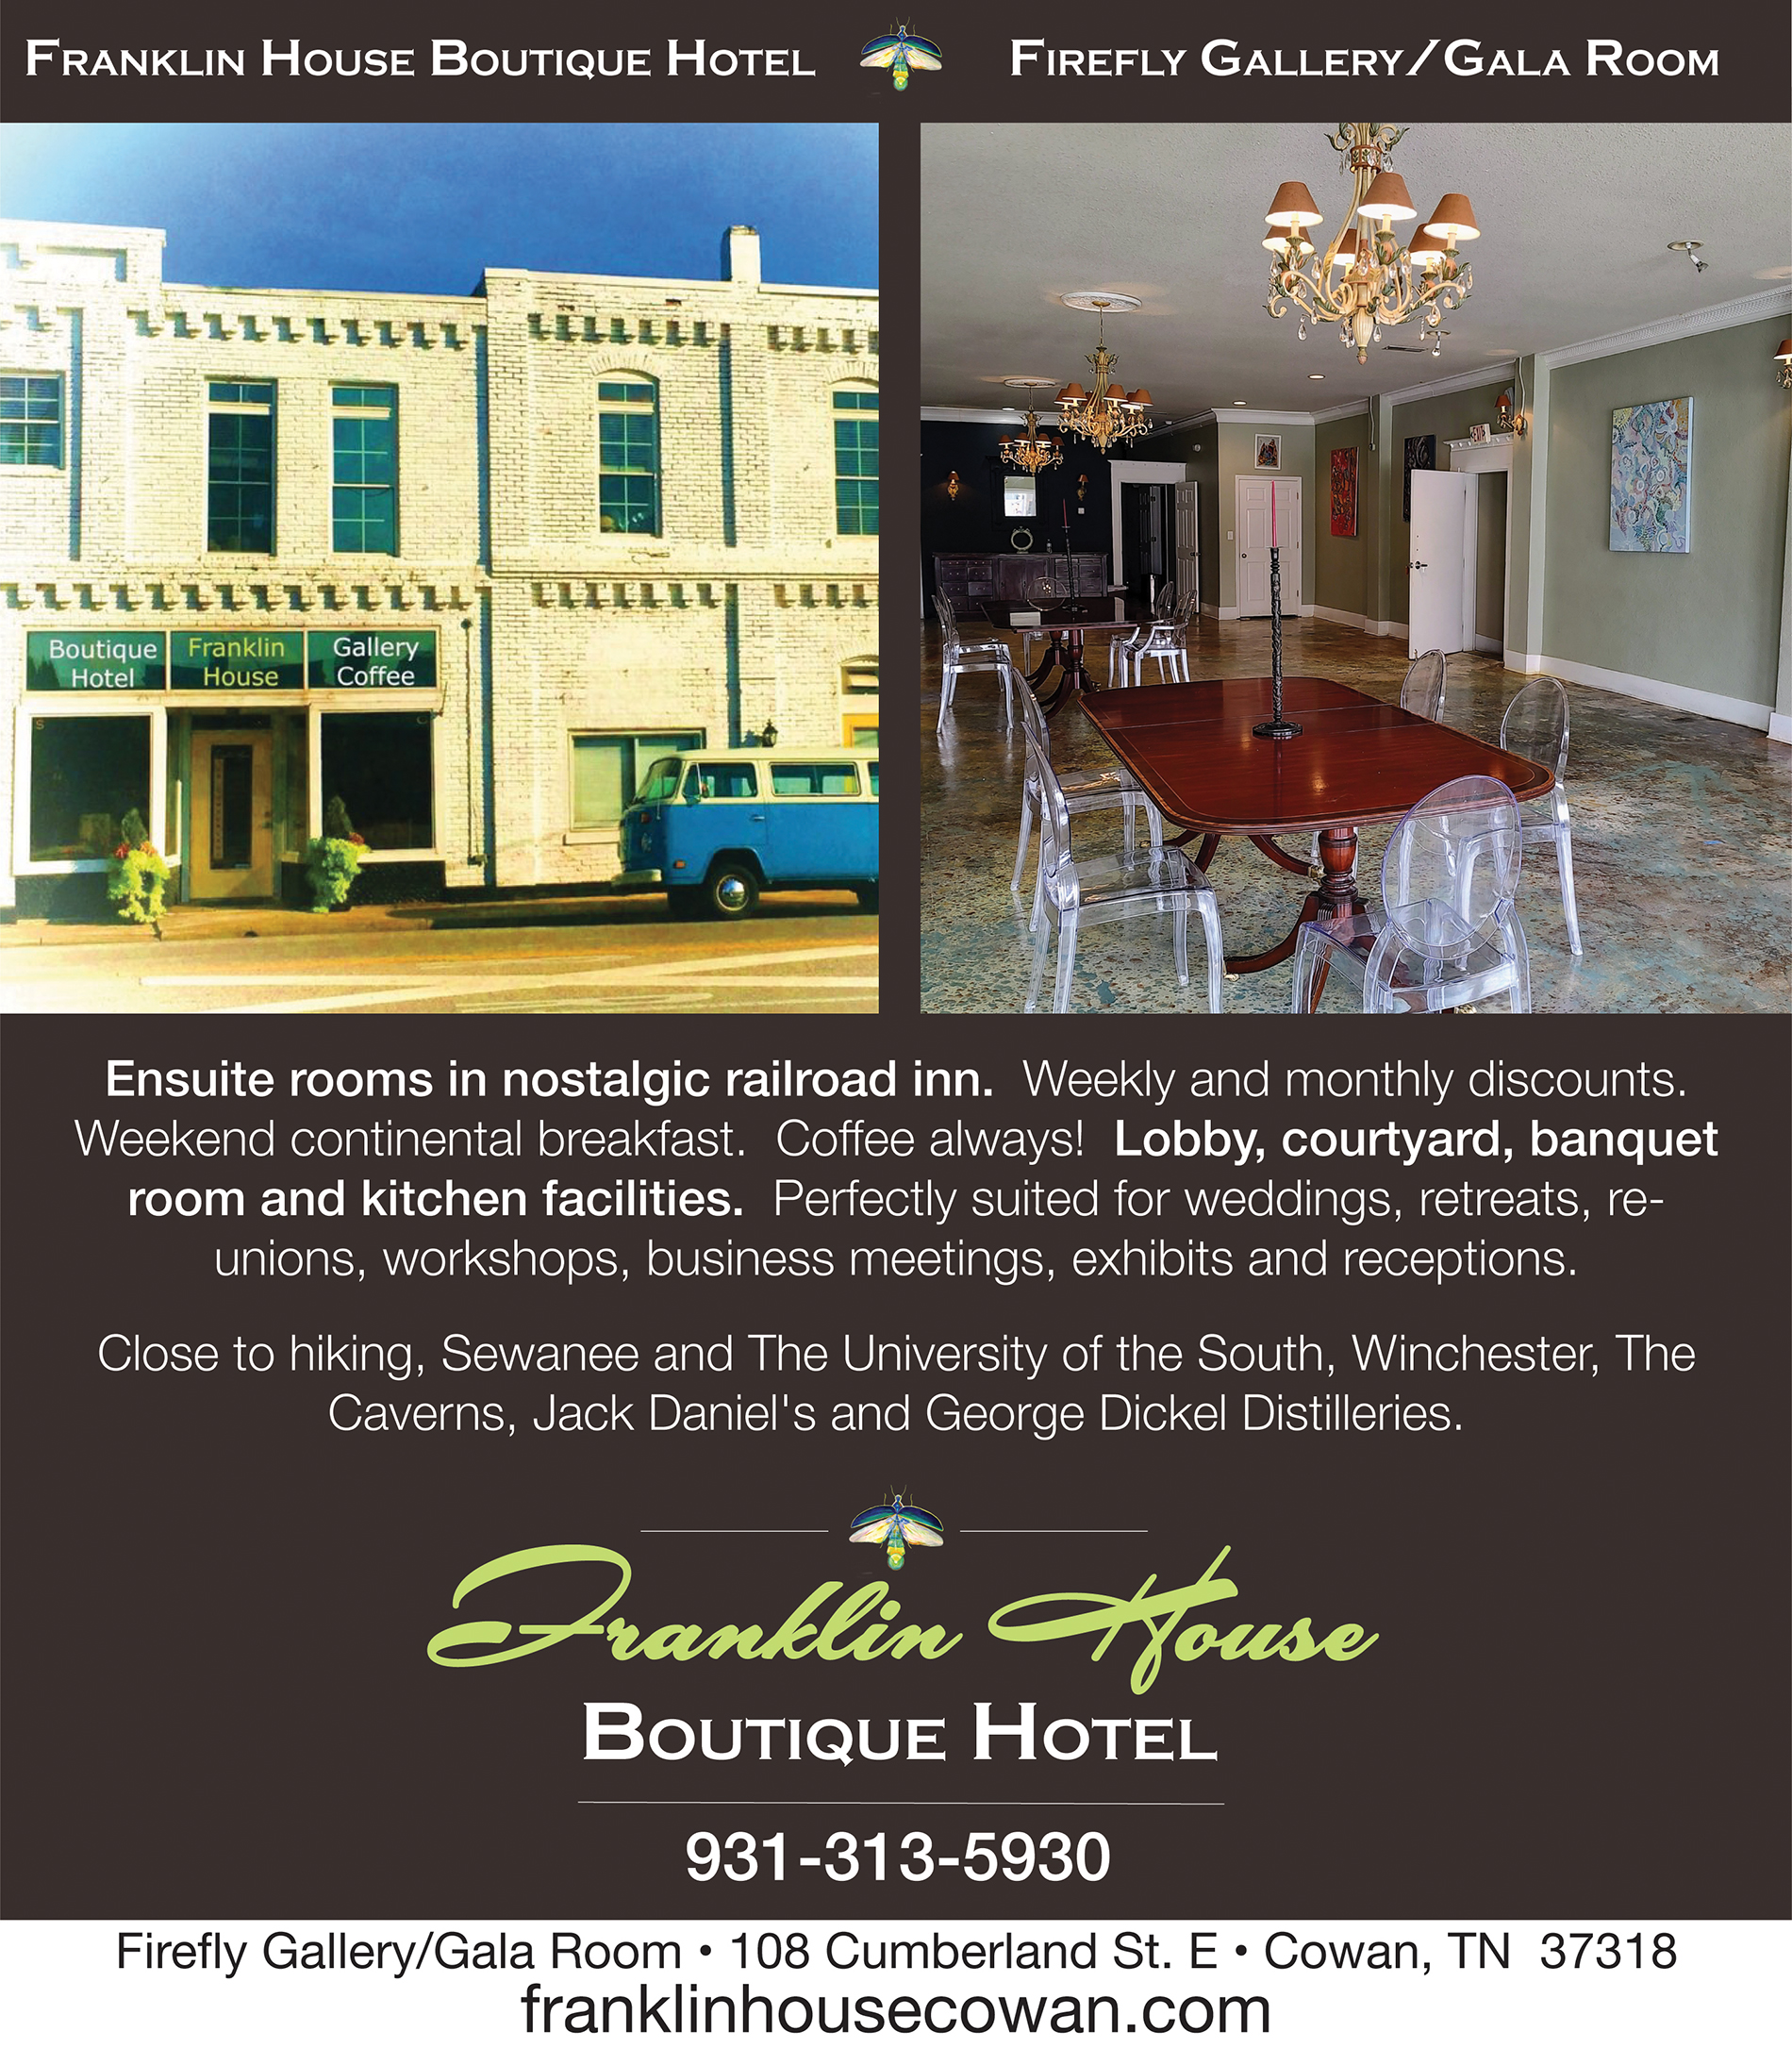 franklin house boutique hotel ad